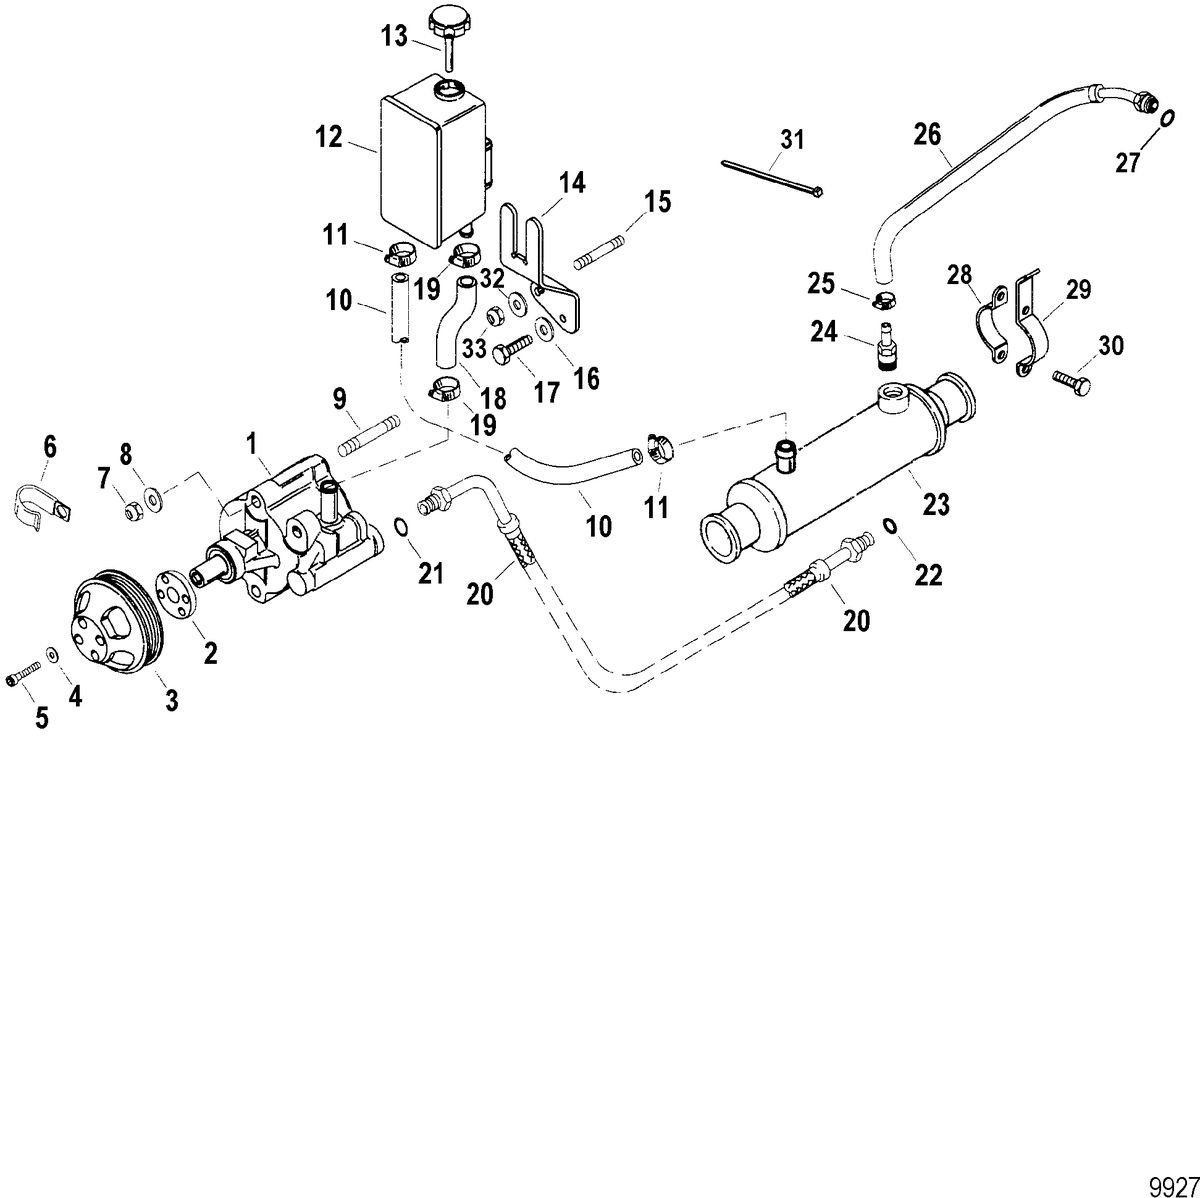 RACE STERNDRIVE 500 EFI Power-Assisted Steering Components(Design I And Design II)